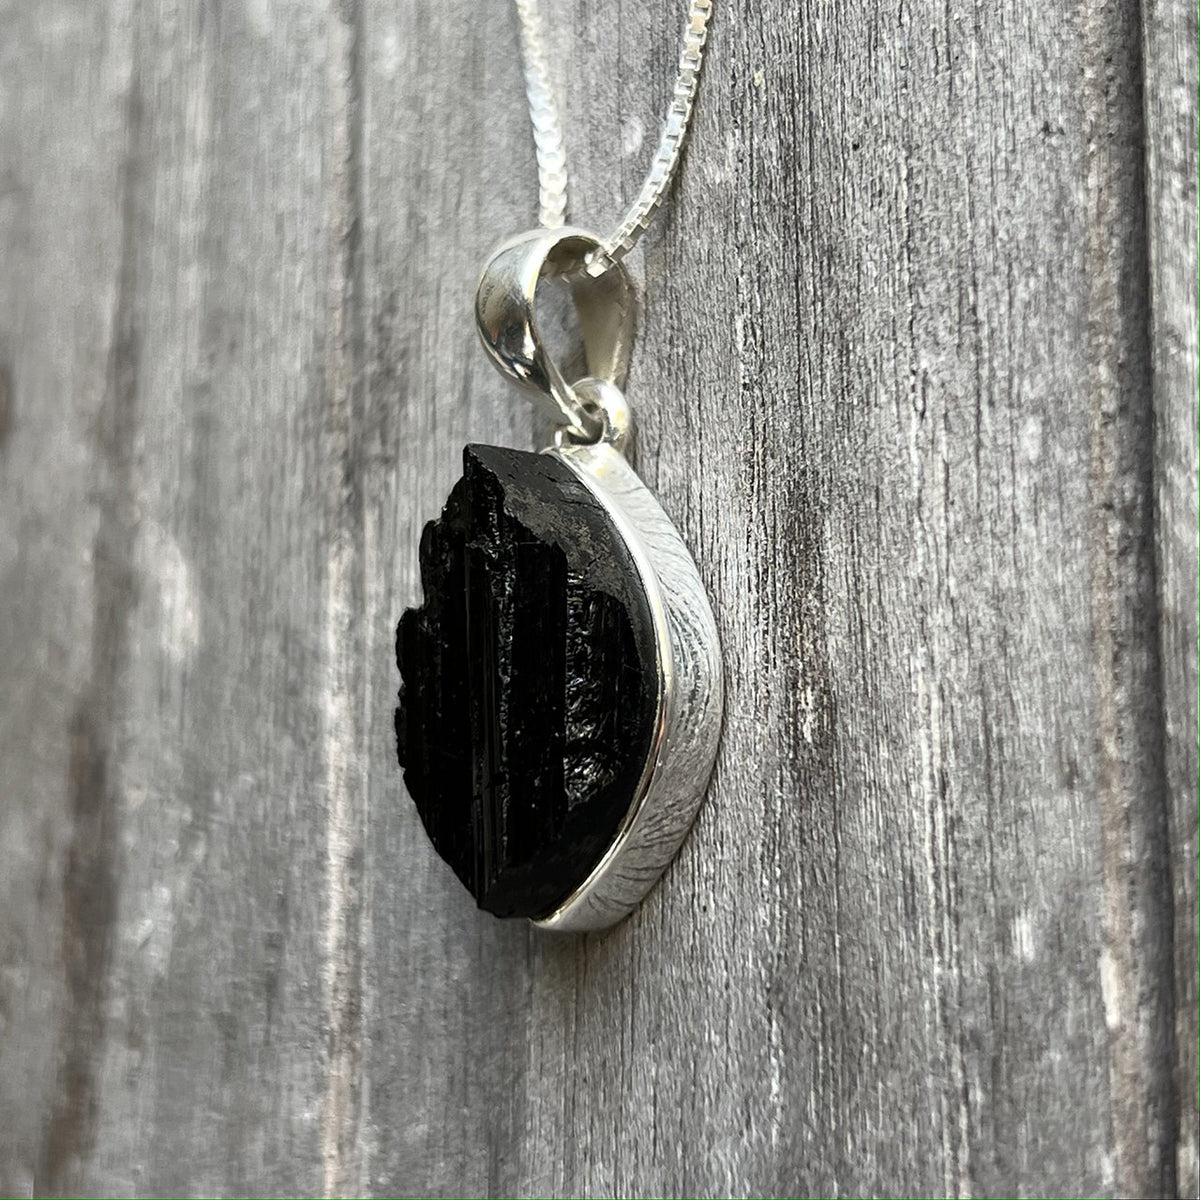 Black Tourmaline aids in the removal of negative energies within a person or a space. Black Tourmaline will cleanse, purify, and transform dense energy into a lighter vibration. A popular metaphysical stone, Black Tourmaline is also great for grounding. It balances, harmonizes, and protects all of the Chakras.